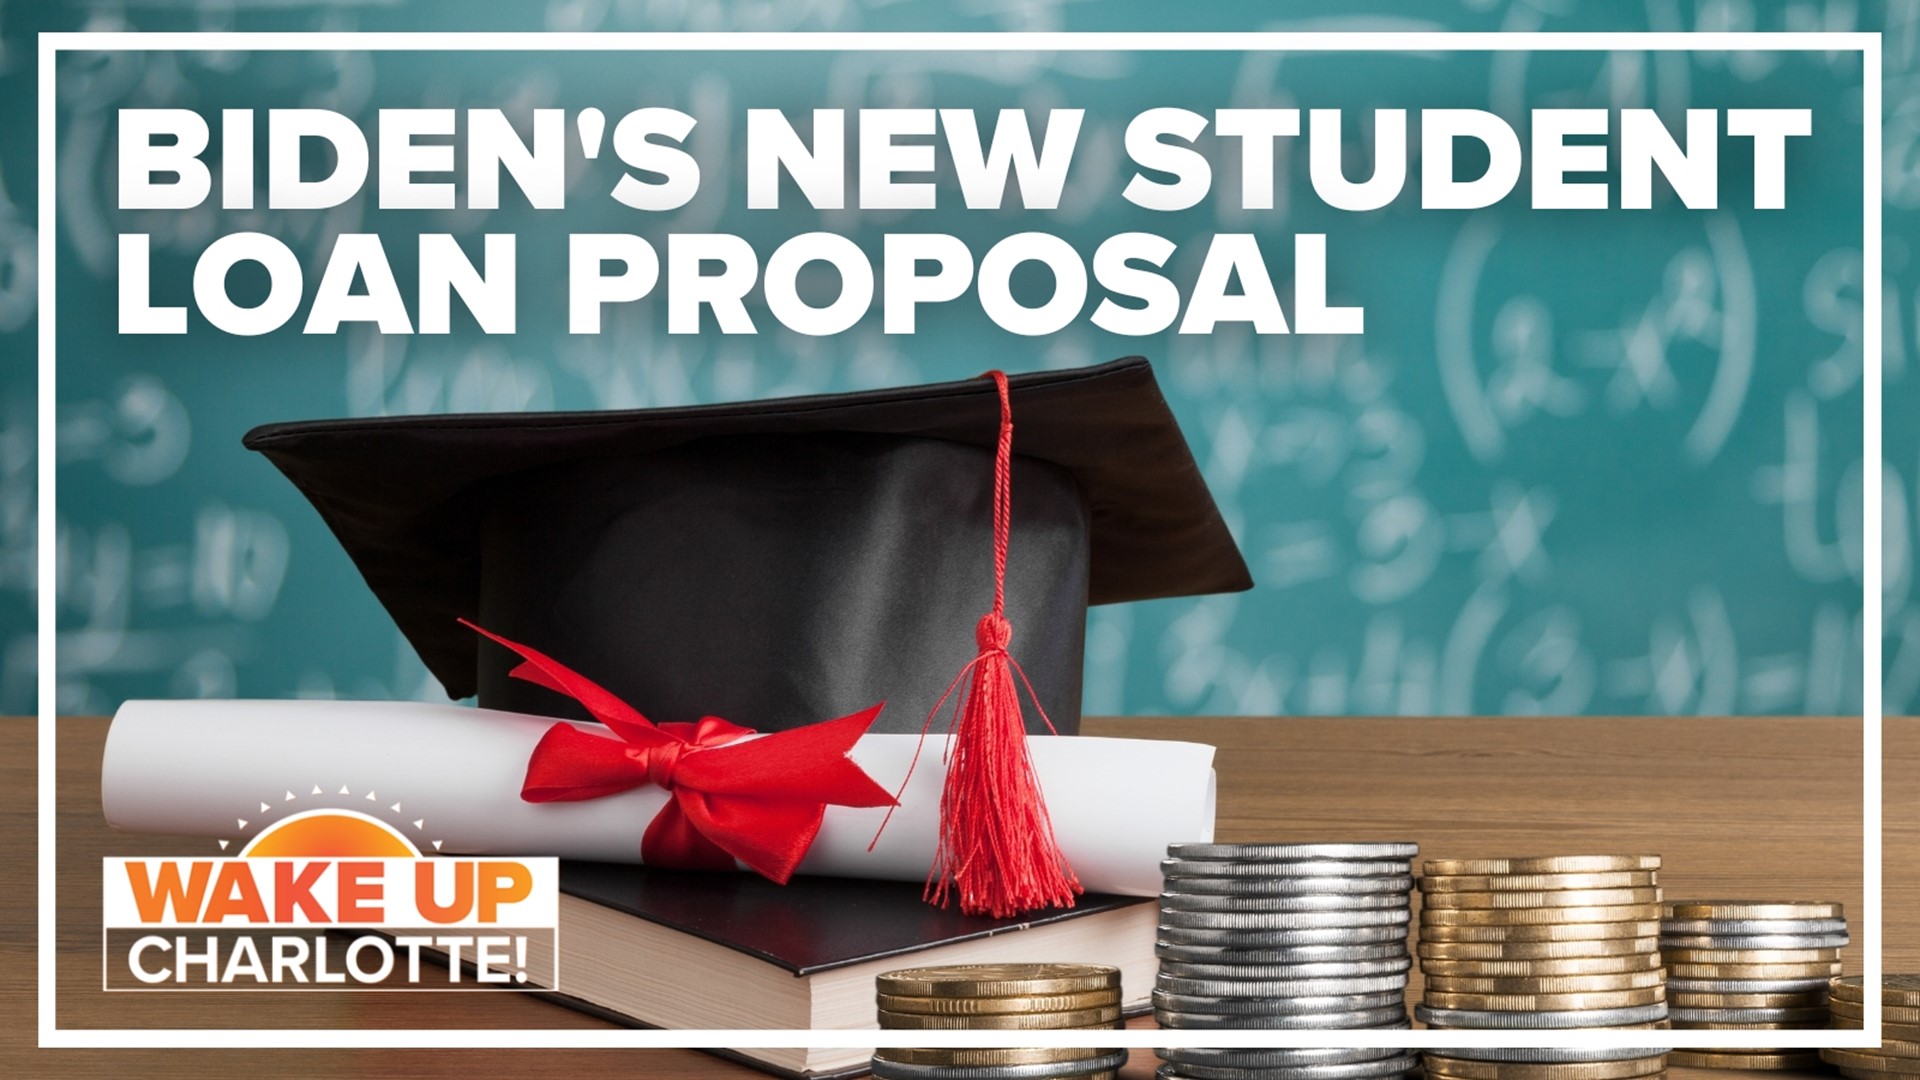 The plan would lower student debt payments for millions, and offer far more generous terms to keep the debt from snowballing.